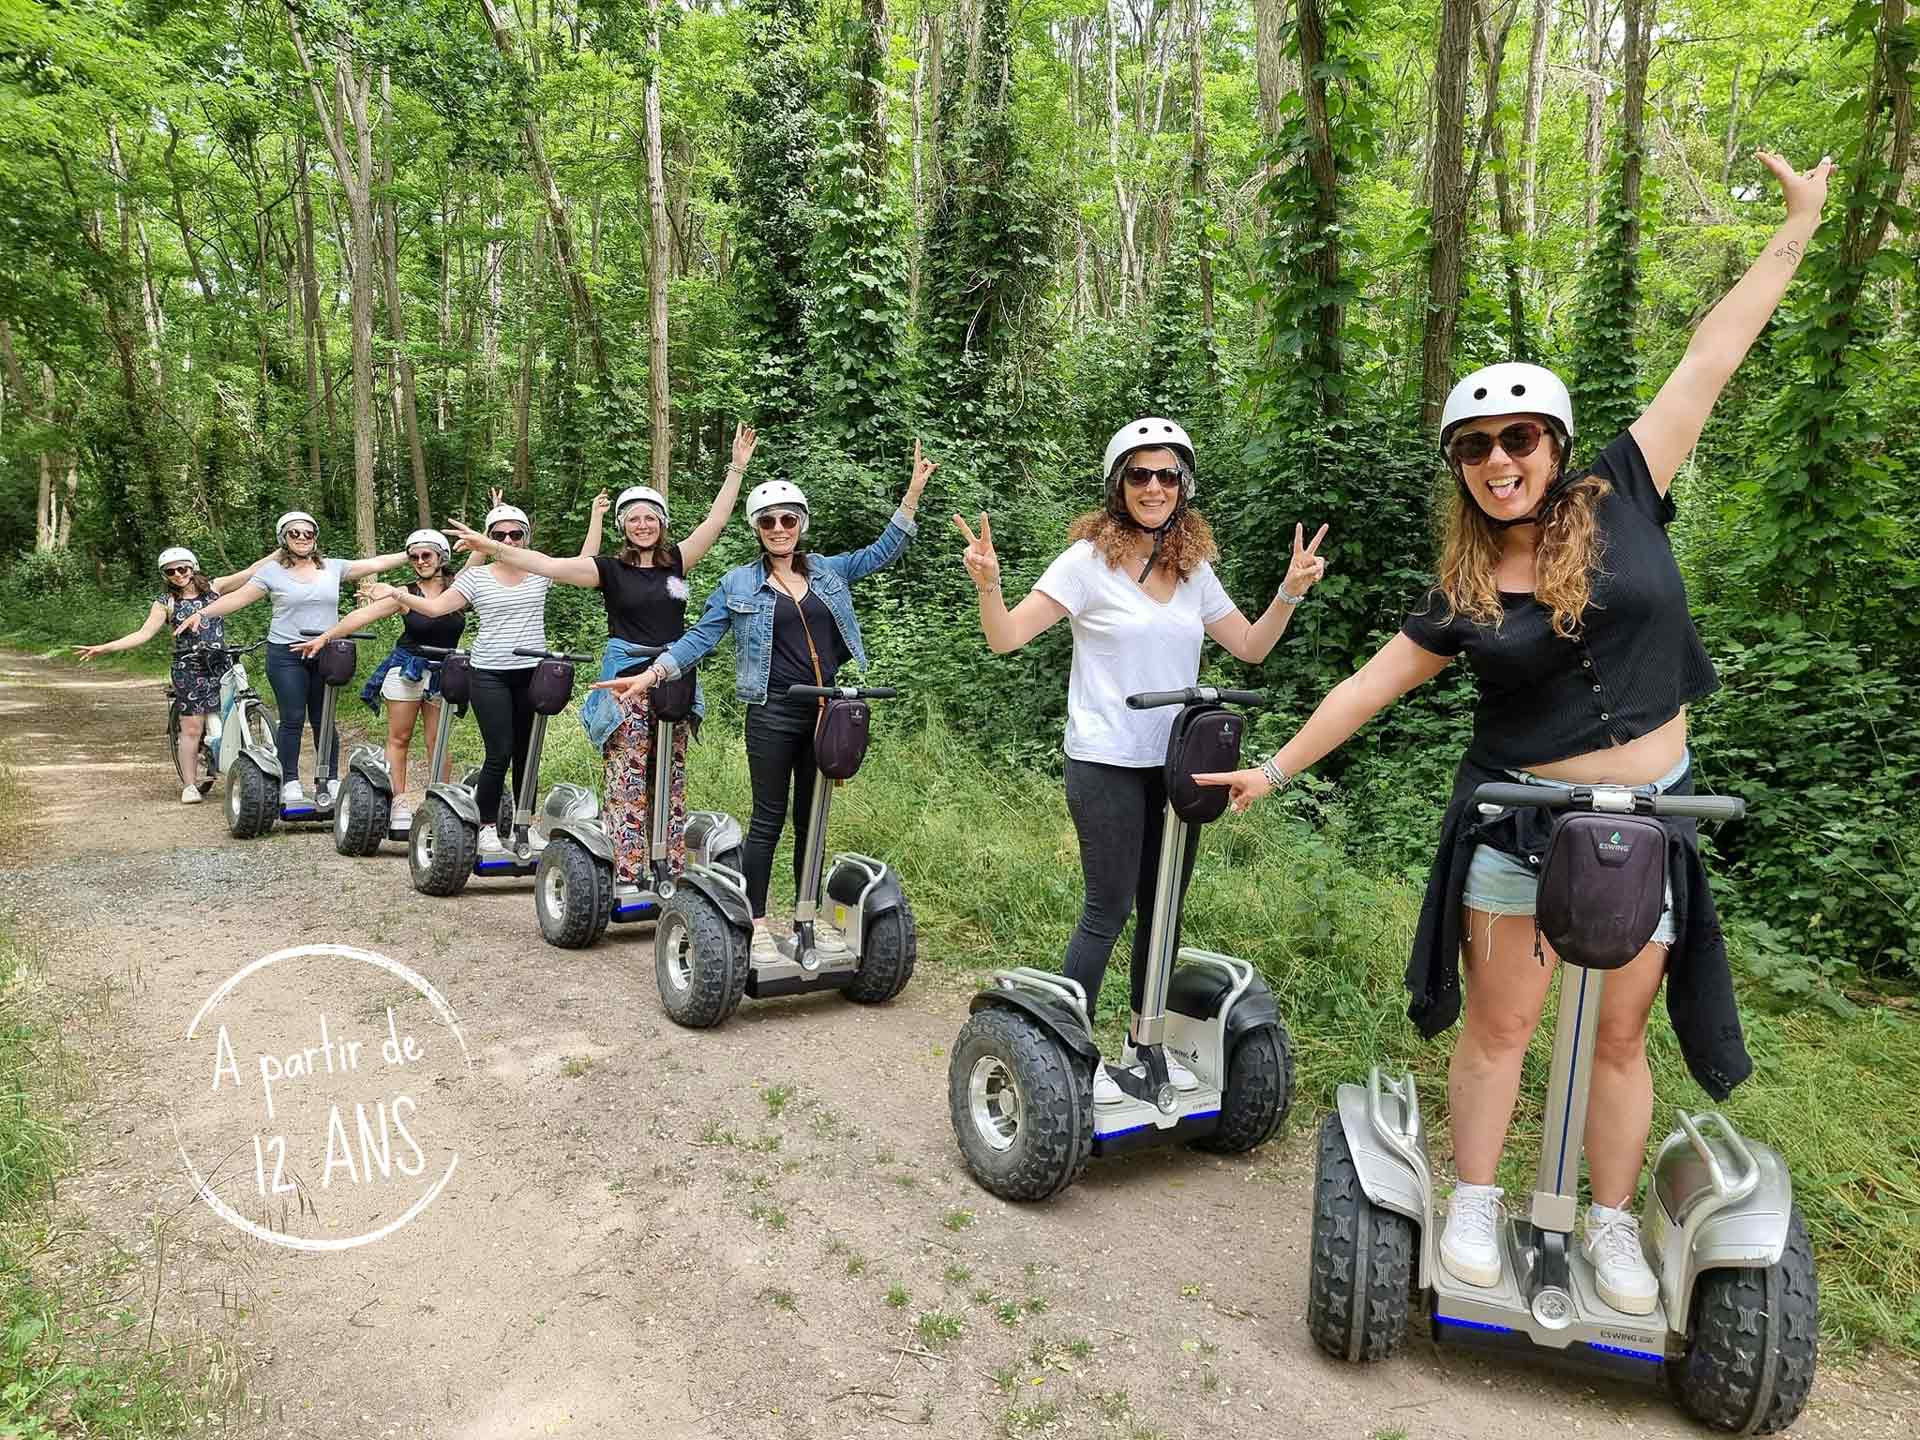 Gyroway - Cross country Segway tours